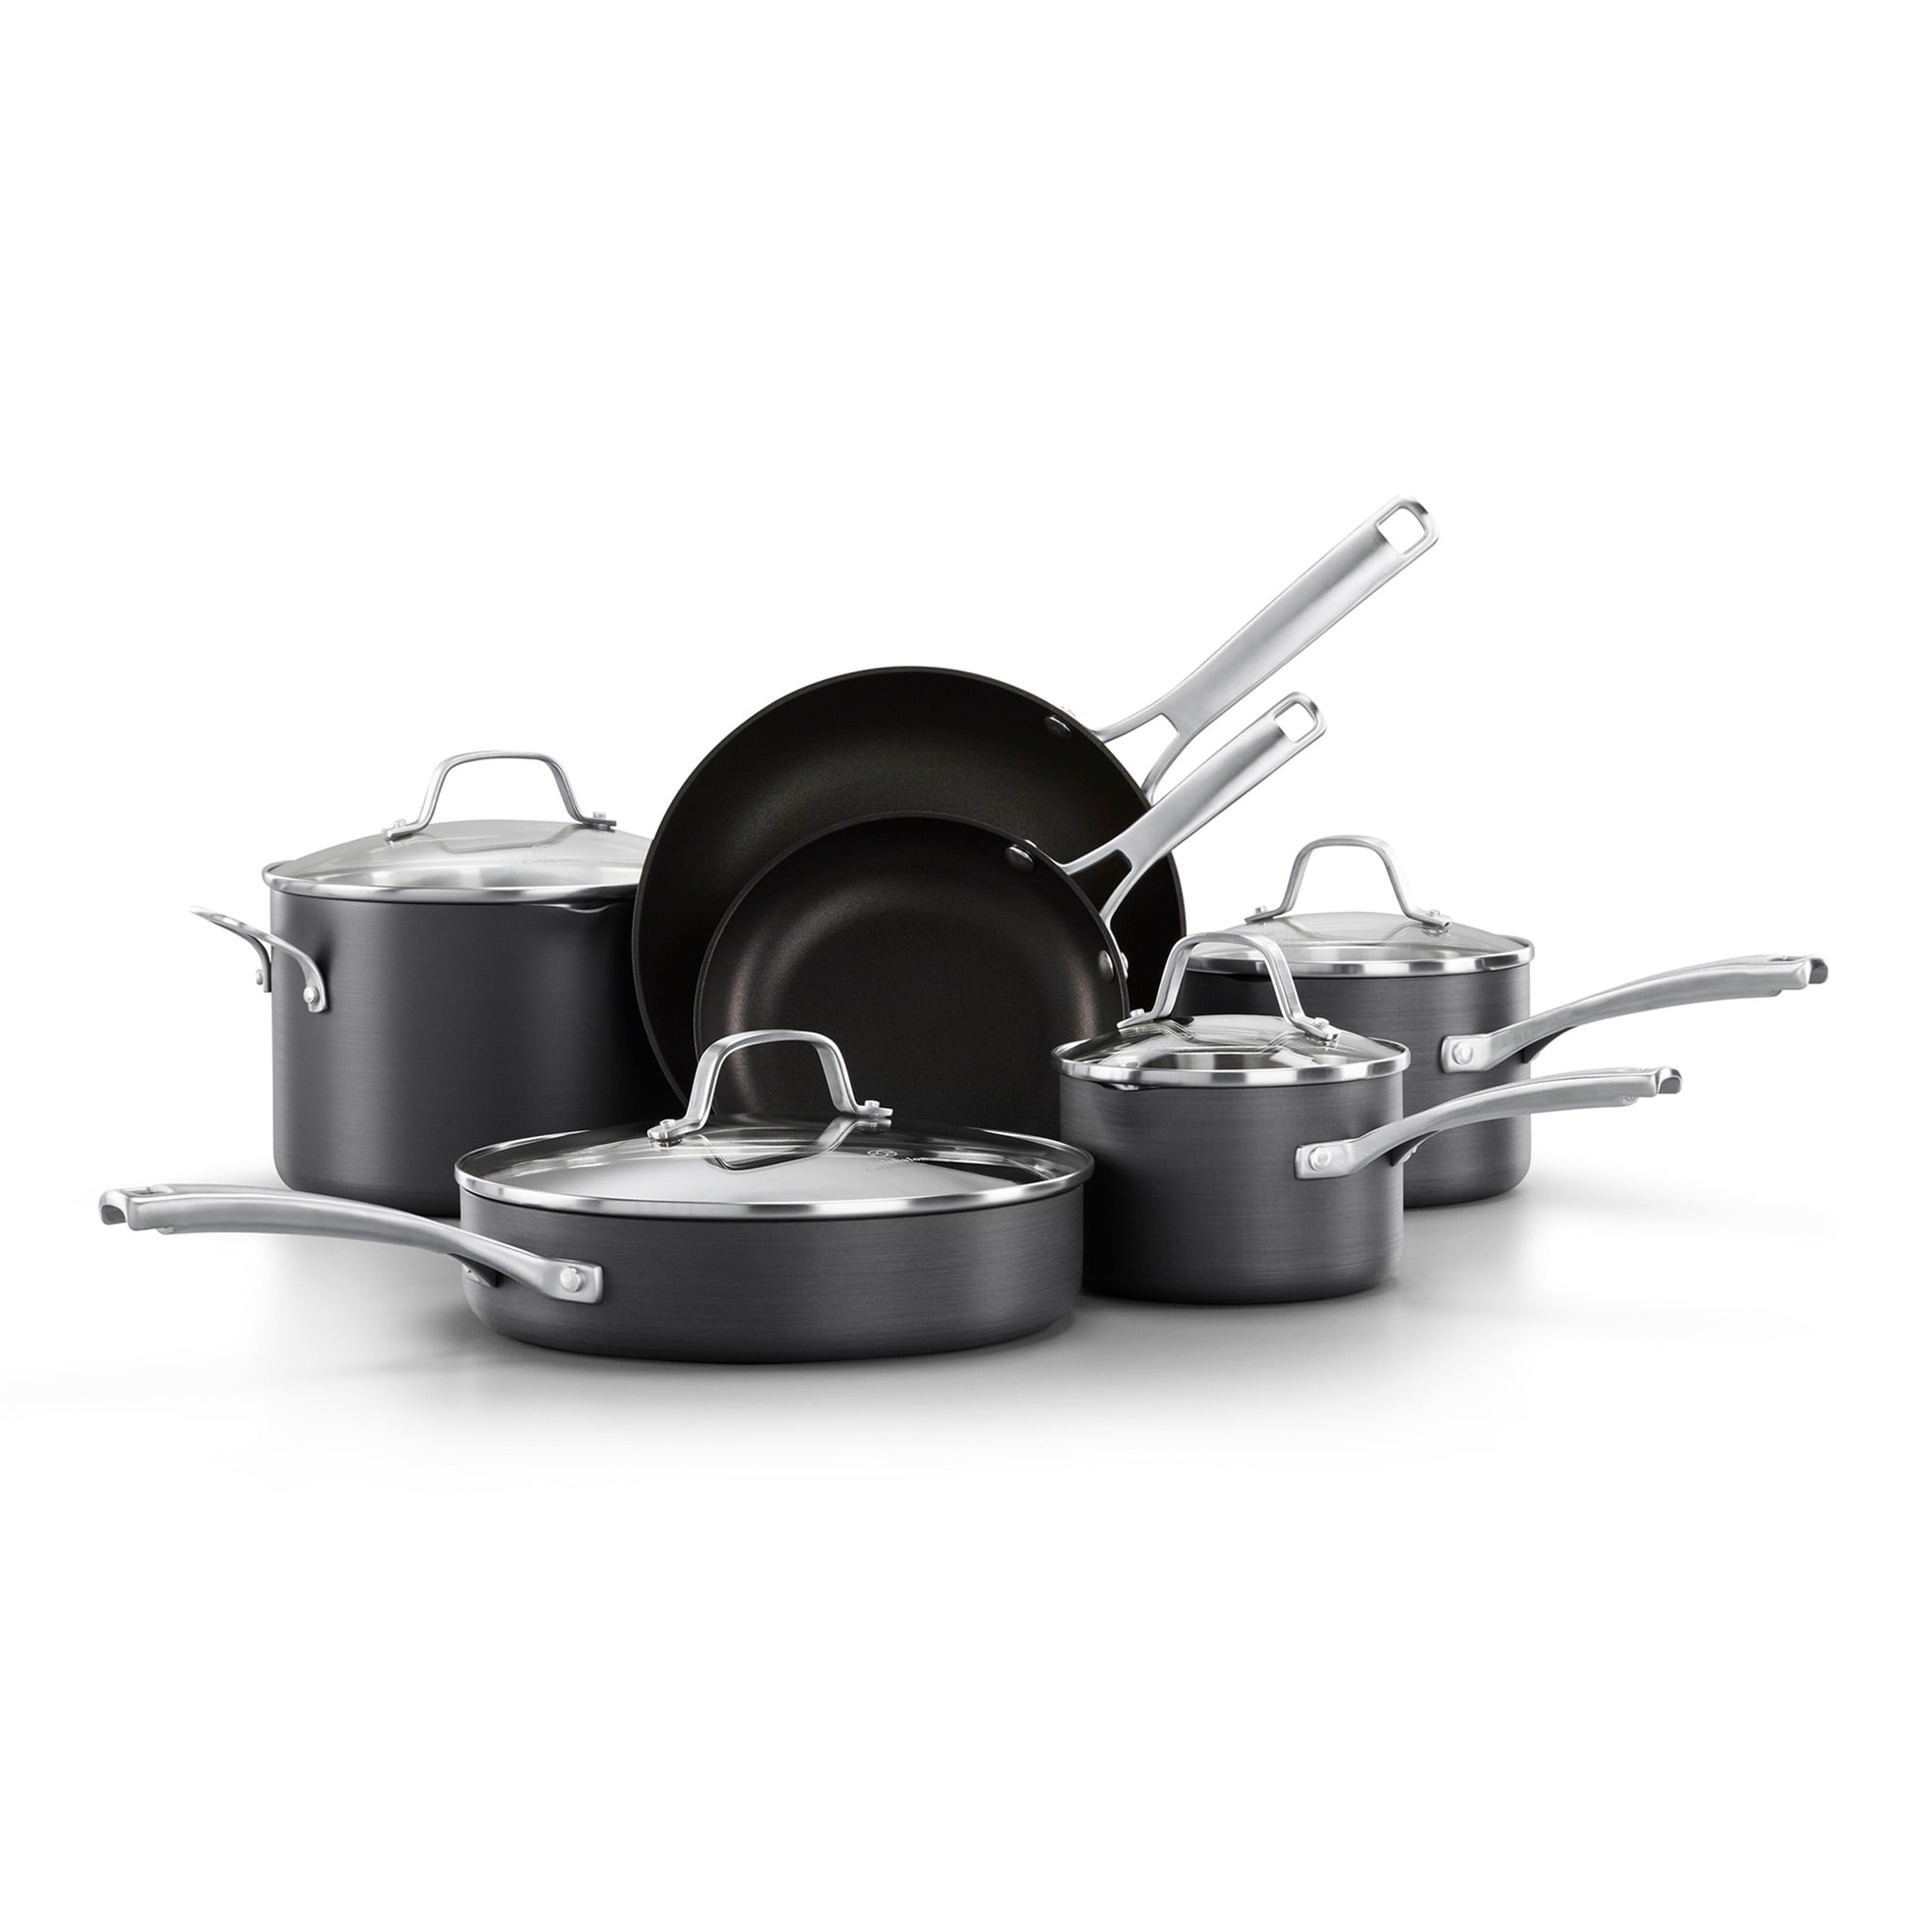  Calphalon 15-Piece Pots and Pans Set, Stackable Nonstick  Kitchen Cookware with Stay-Cool Stainless Steel Handles, Black: Home &  Kitchen